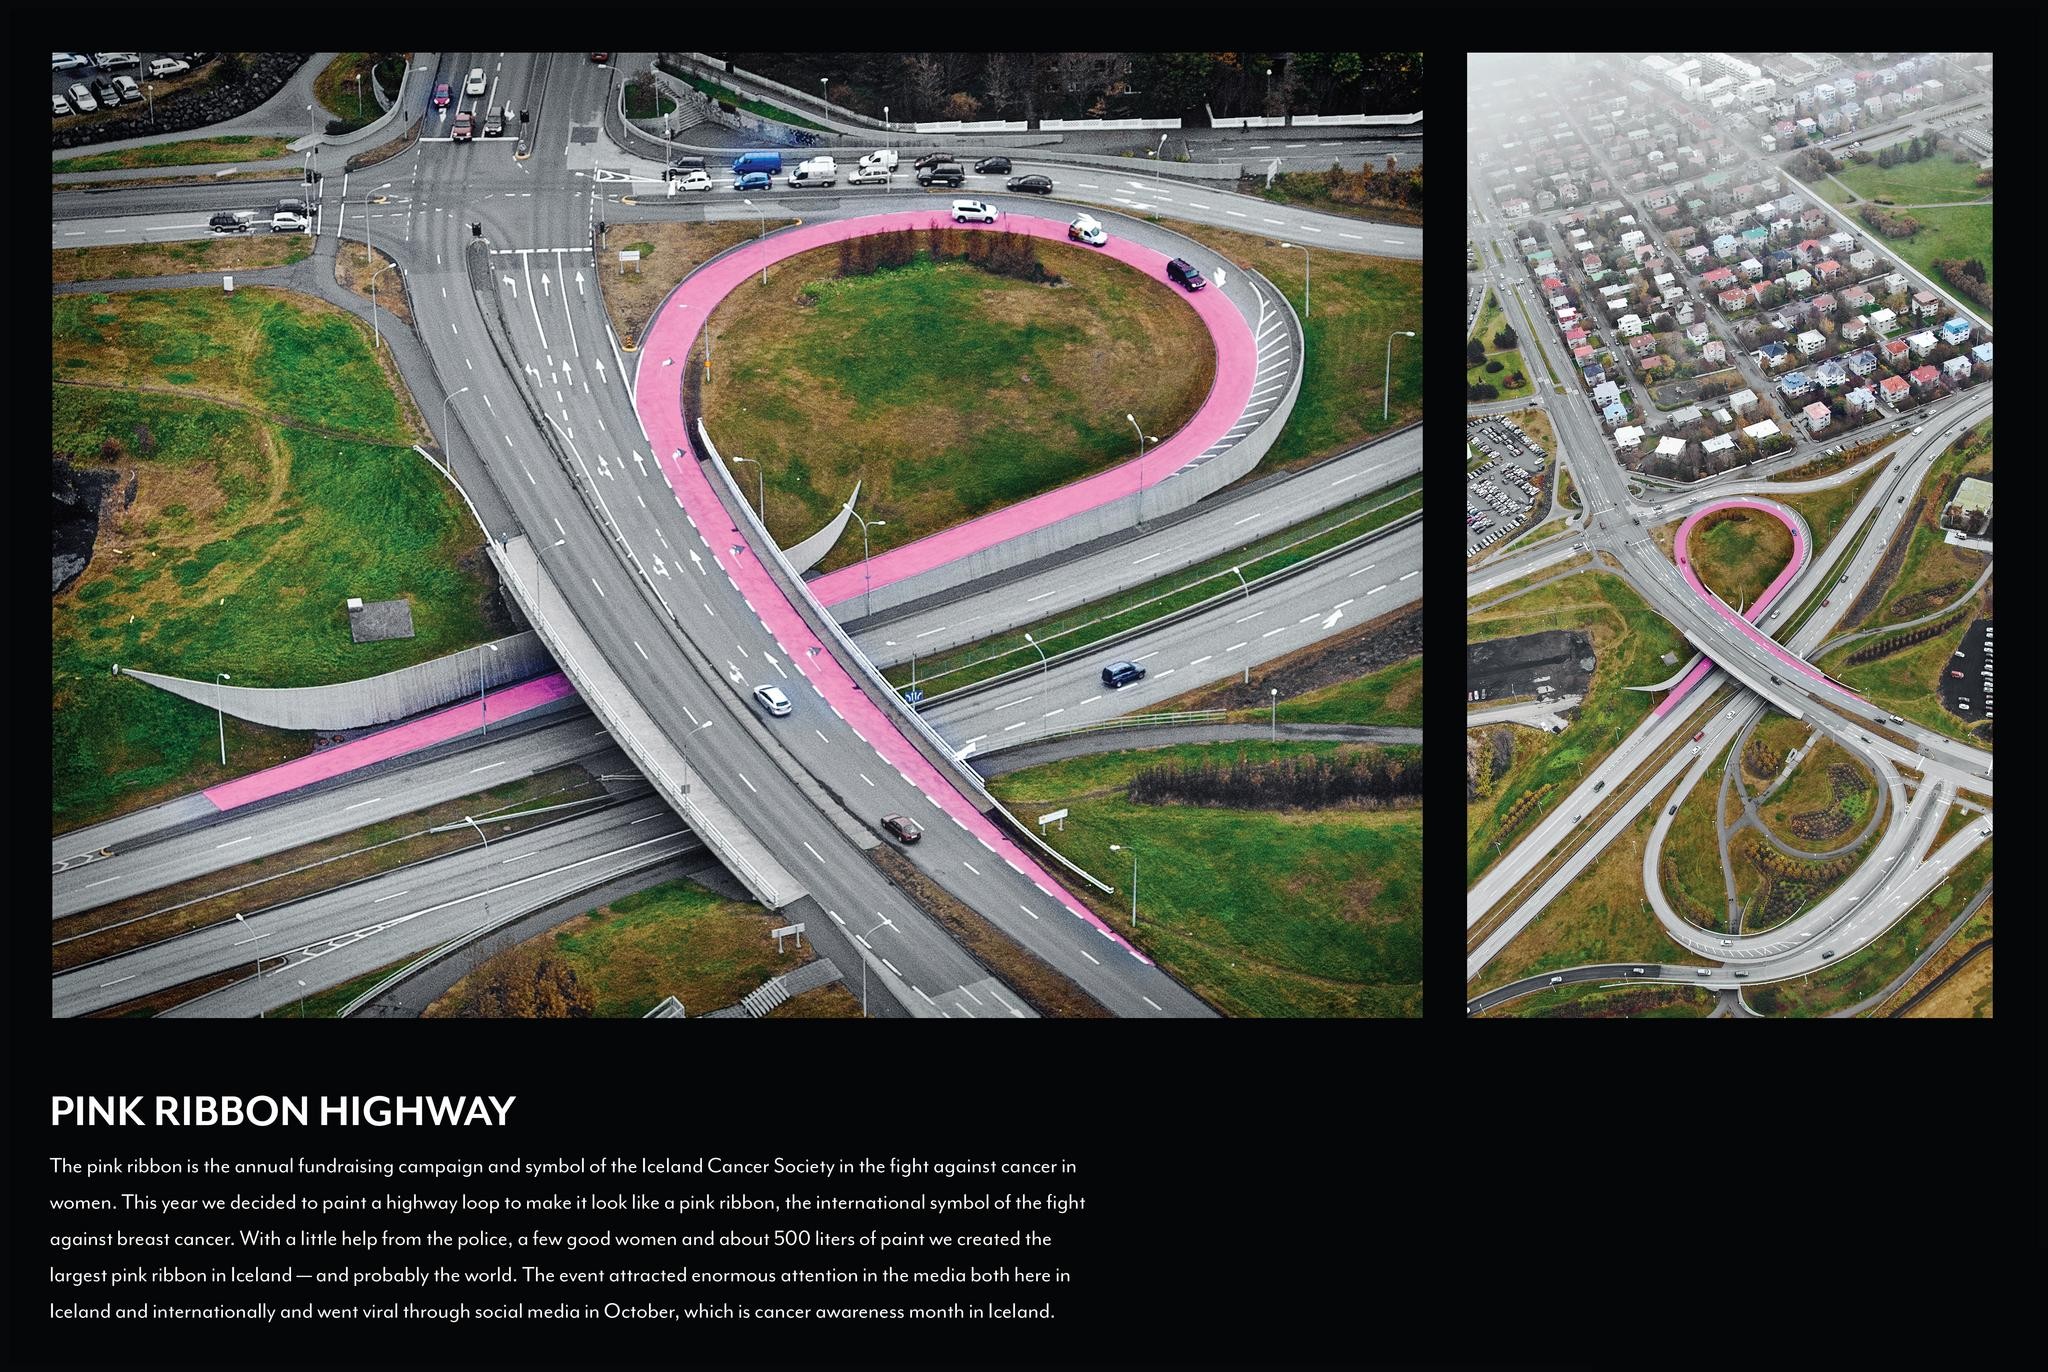 THE PINK RIBBON HIGHWAY